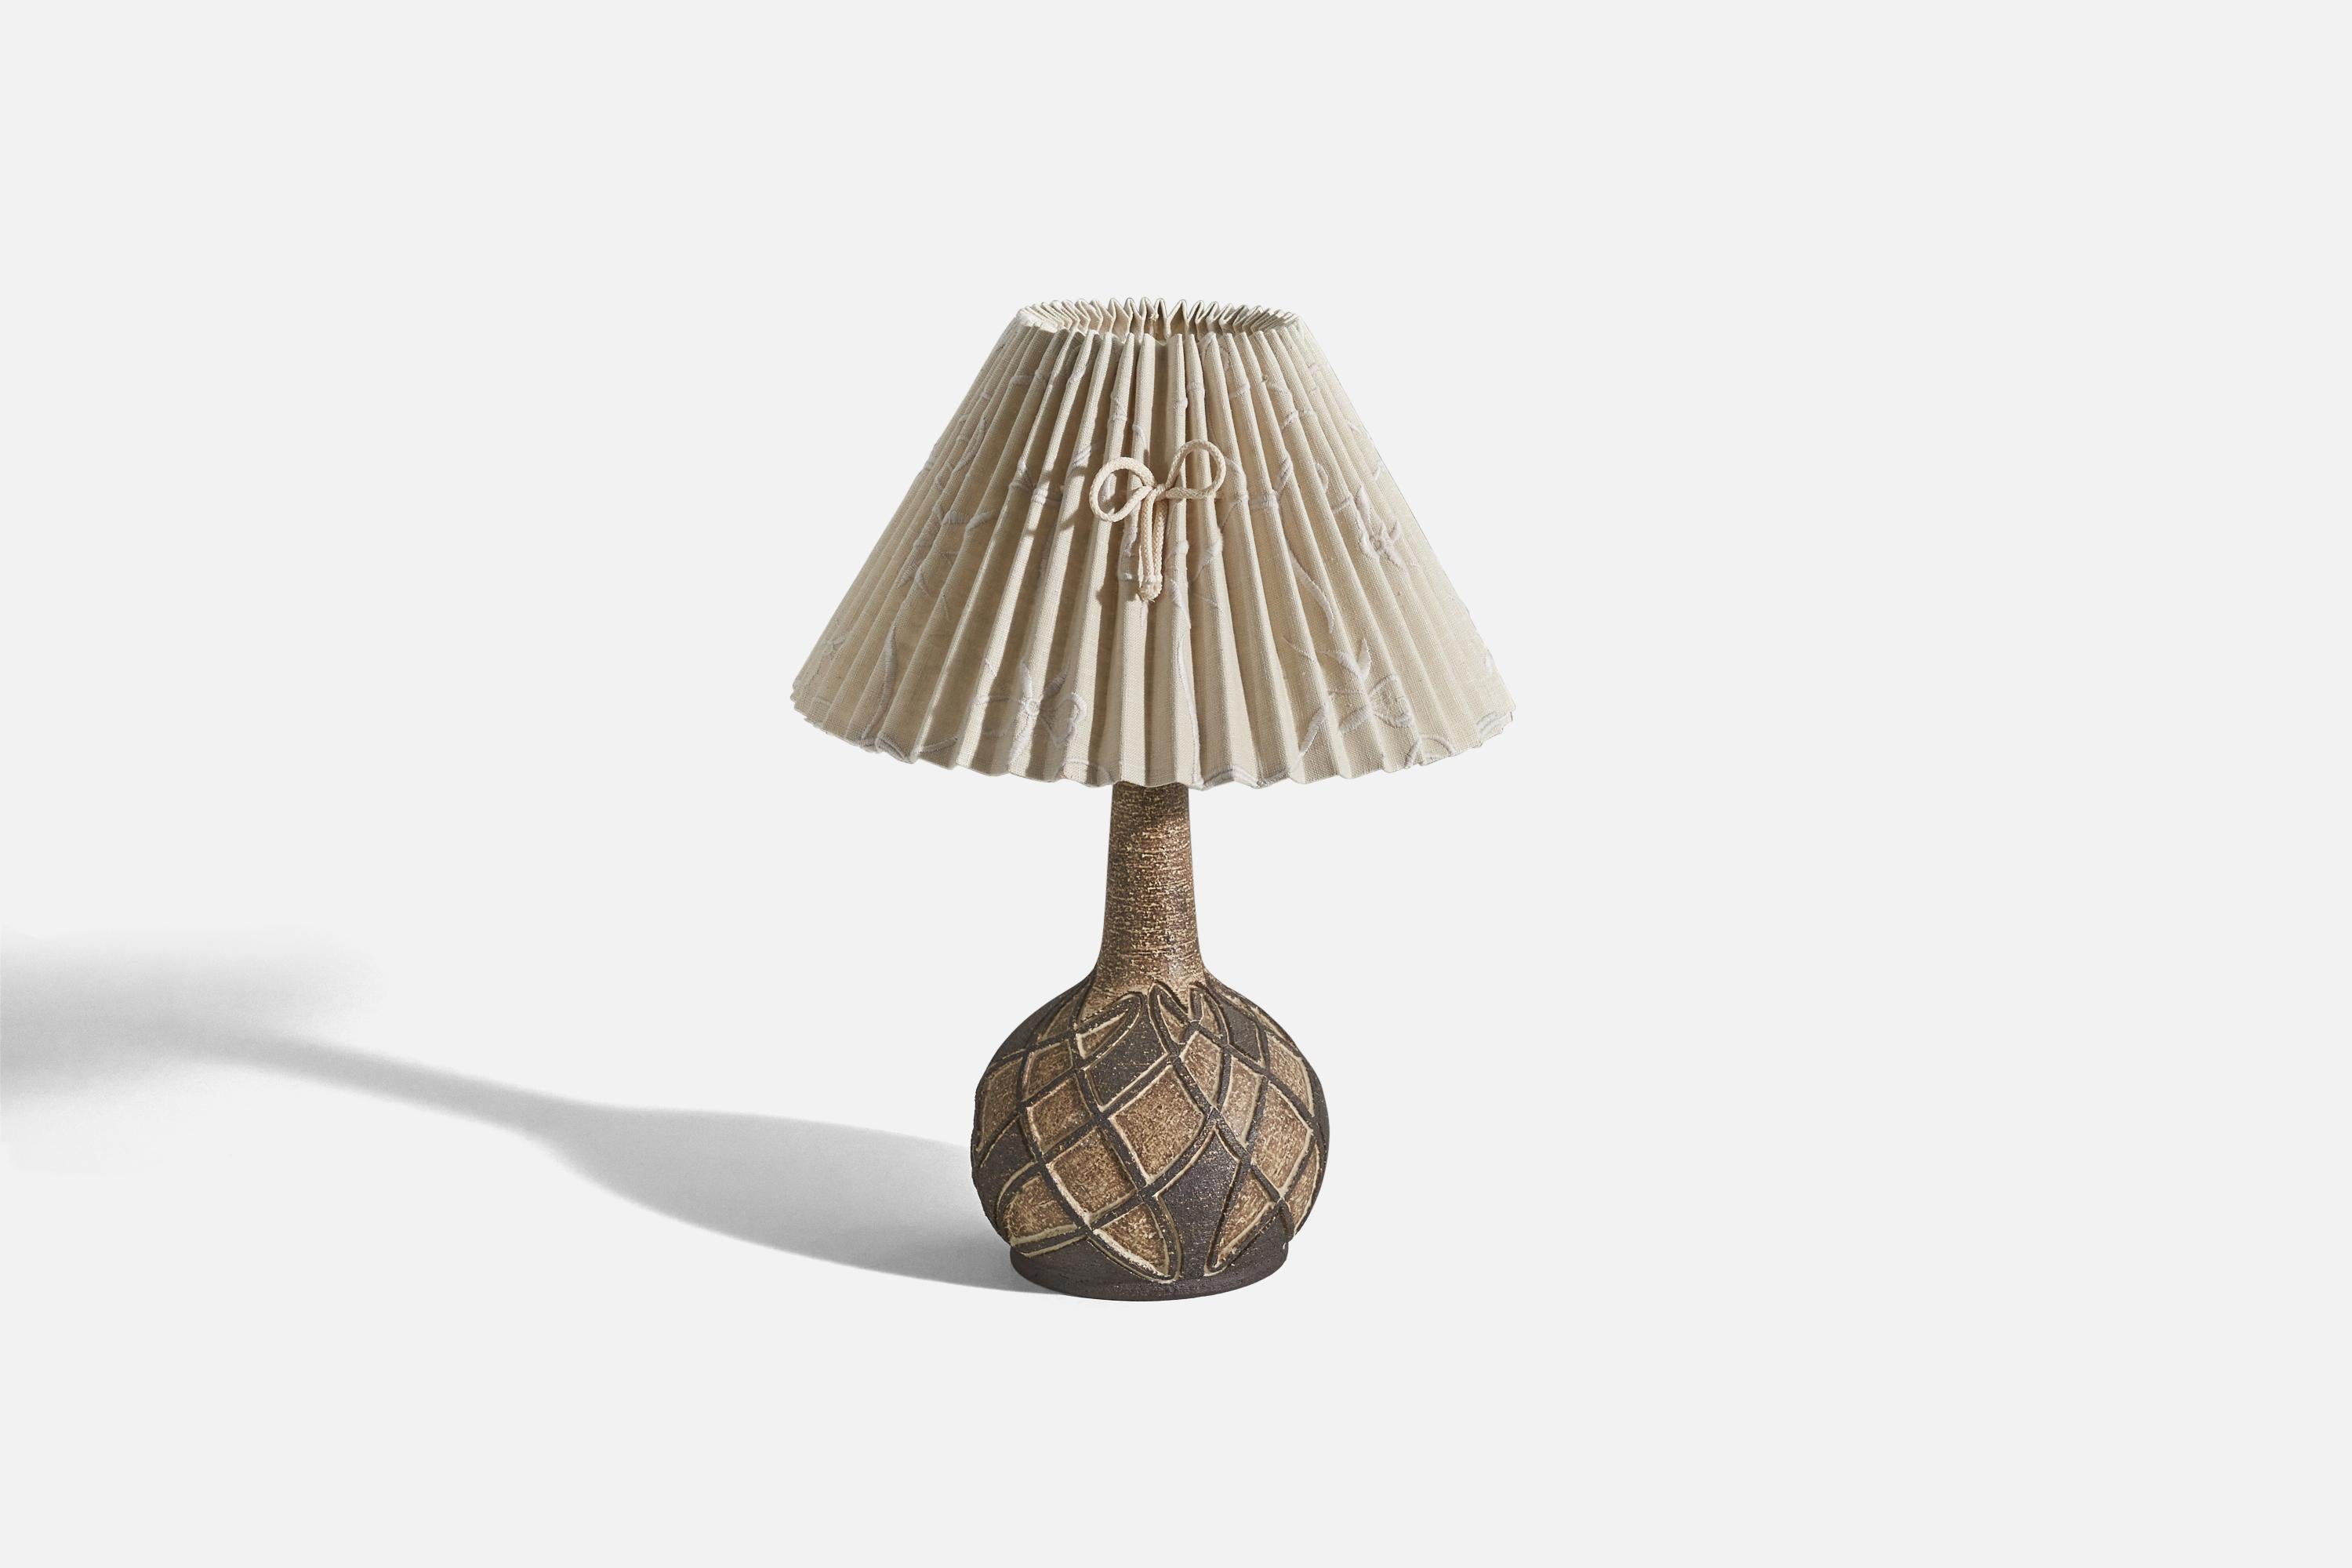 A sizeable brown glazed stoneware and fabric table lamp designed and produced by a Danish designer, Denmark, c. 1960s.

Sold with Lampshade. 
Stated dimensions refer to the Lamp with the Shade. 